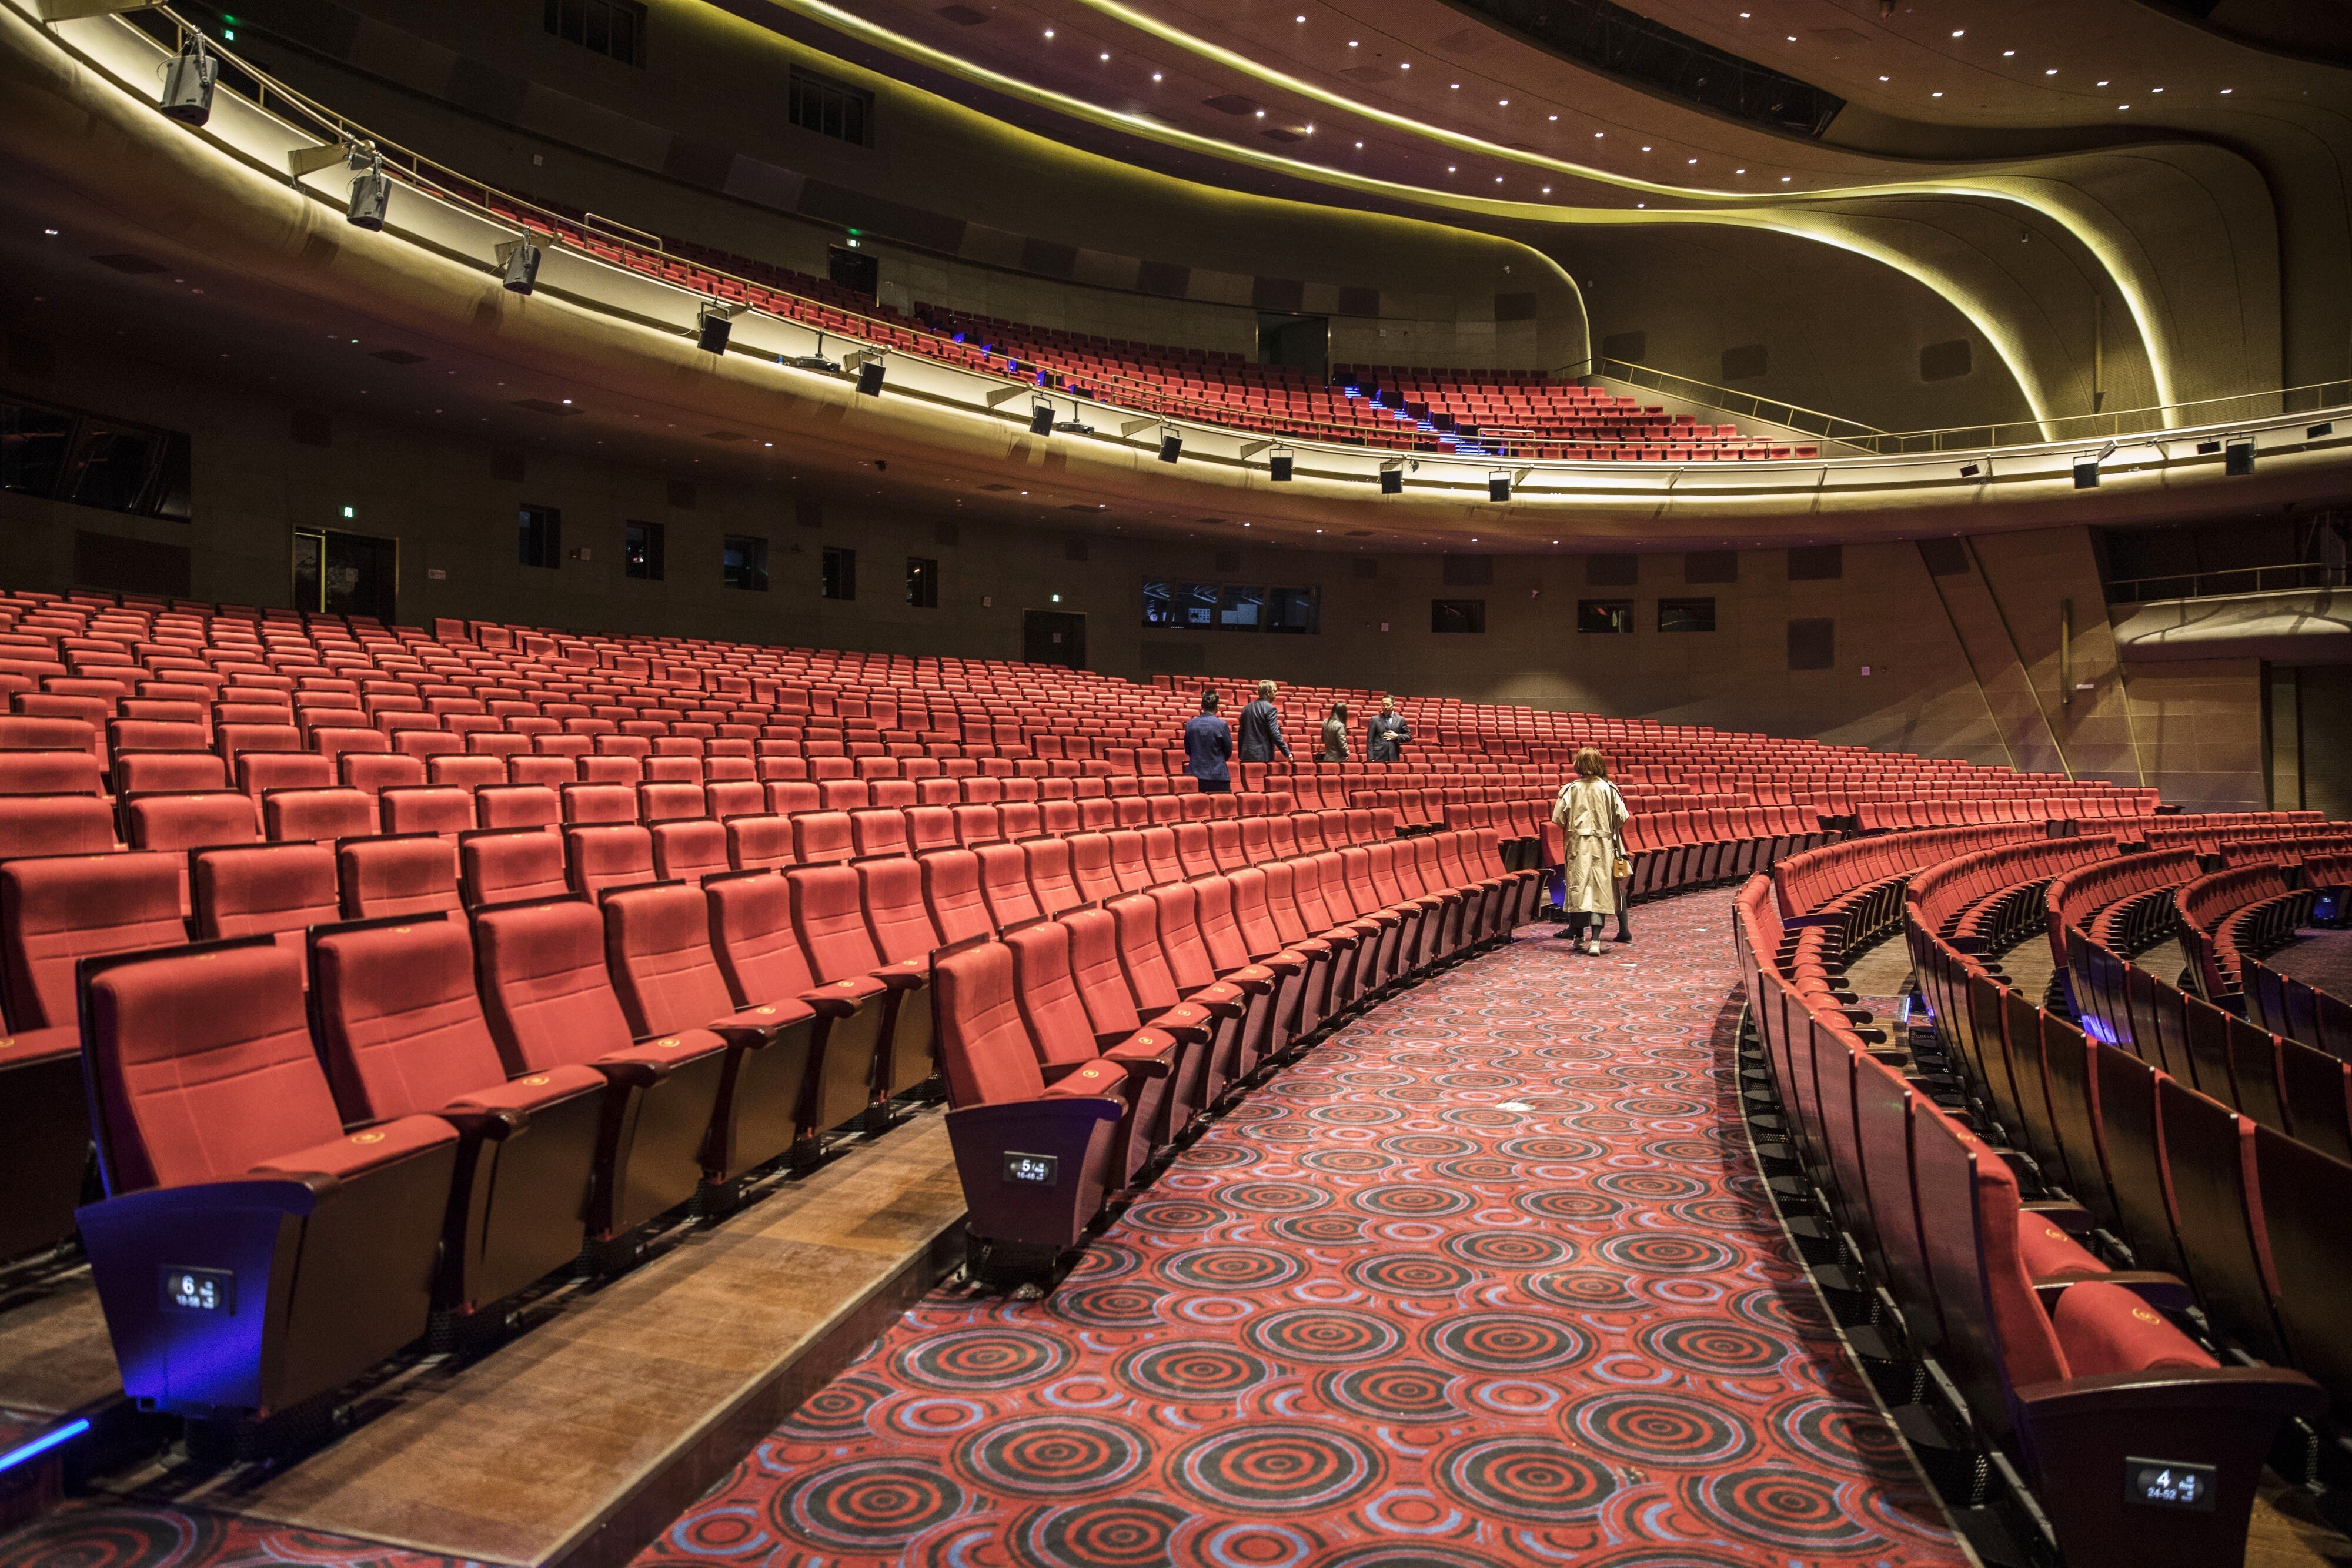 The Grand Theatre at Dalian Wanda Group’s Oriental Movie Metropolis film production hub in Qingdao, China. Wanda is pushing ahead with an expansion plan as the coronavirus comes under control. Photo: Bloomberg